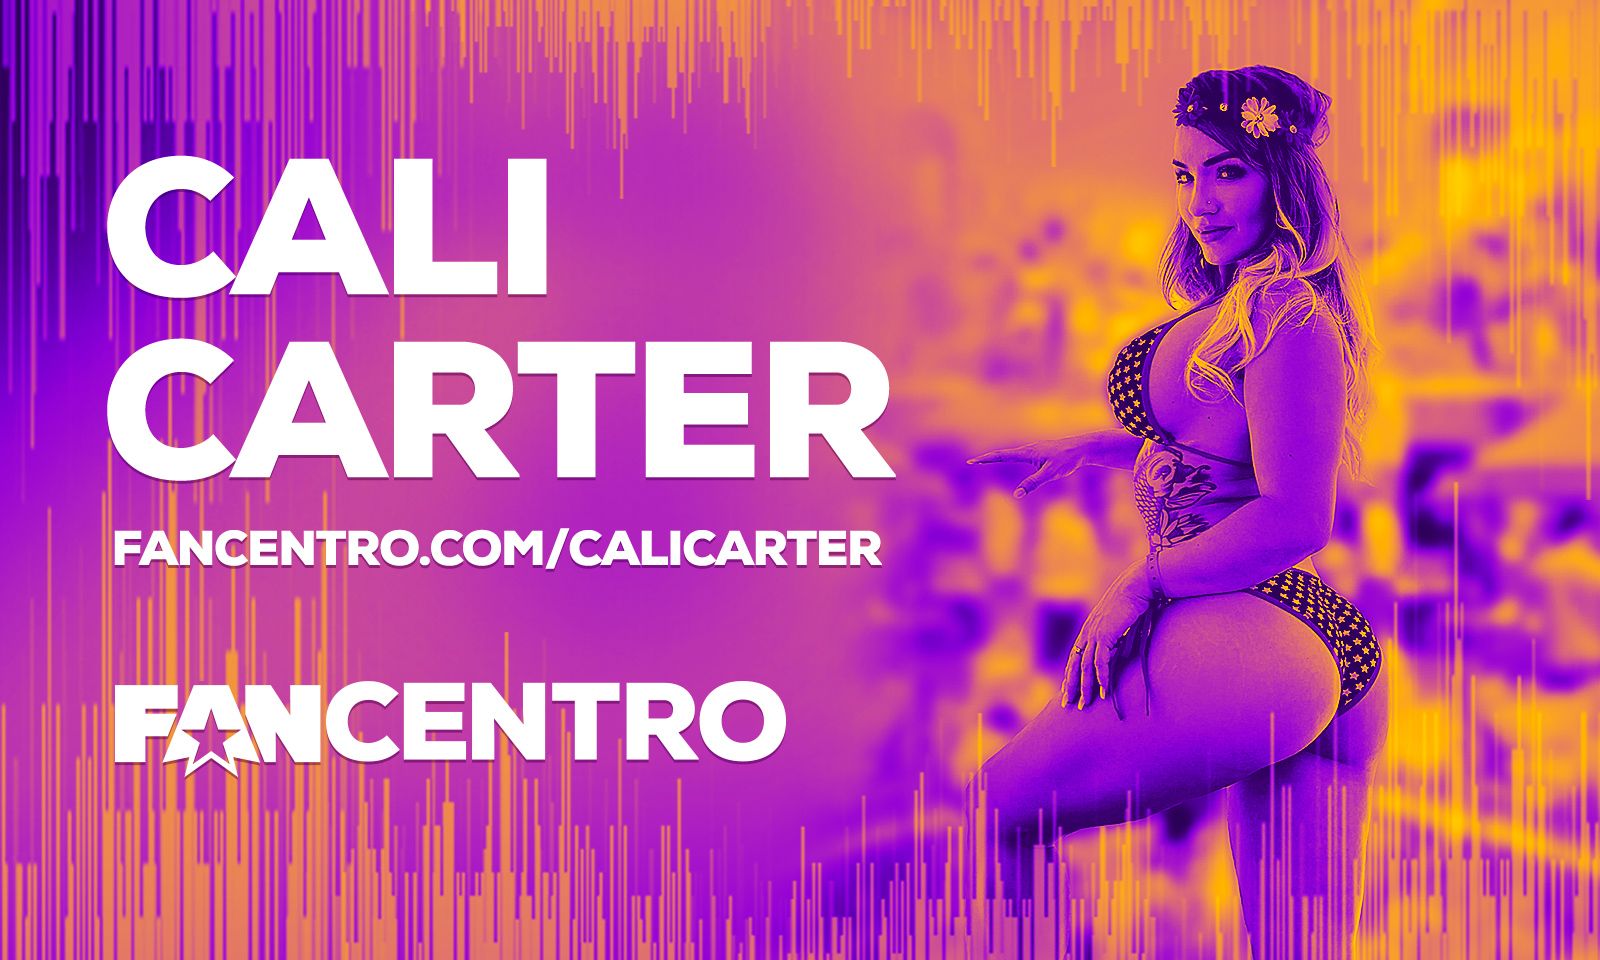 Cali Carter Is The Latest Star To Join FanCentro